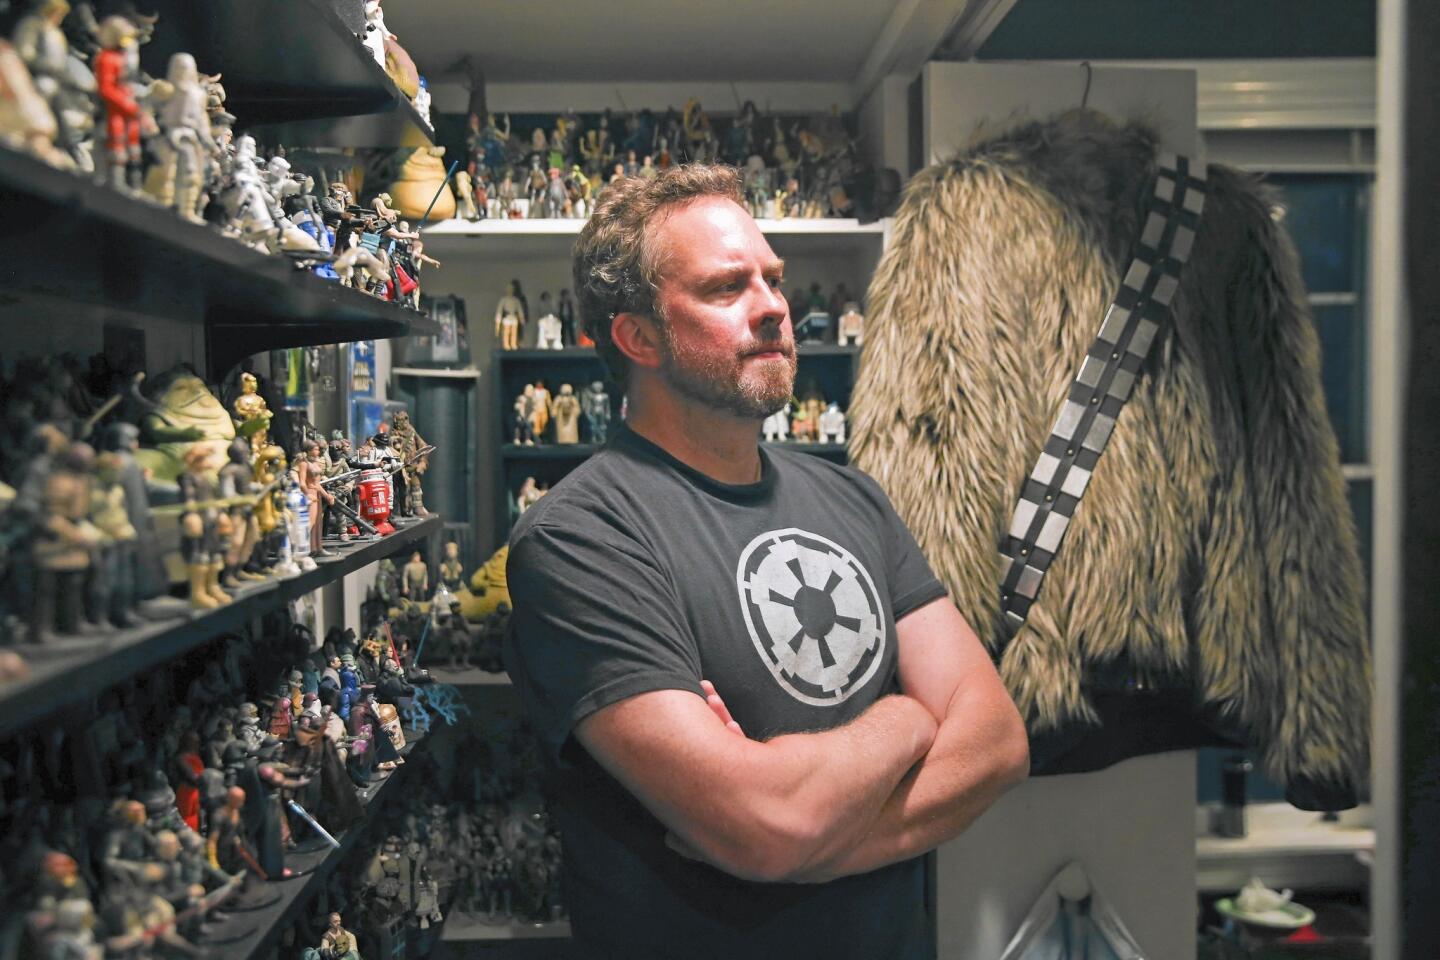 Radio producer Jimmy "Jimmy Mac" McInerney creates his Star Wars podcast called Rebel Force Radio in his LaGrange home on July 14, 2015.